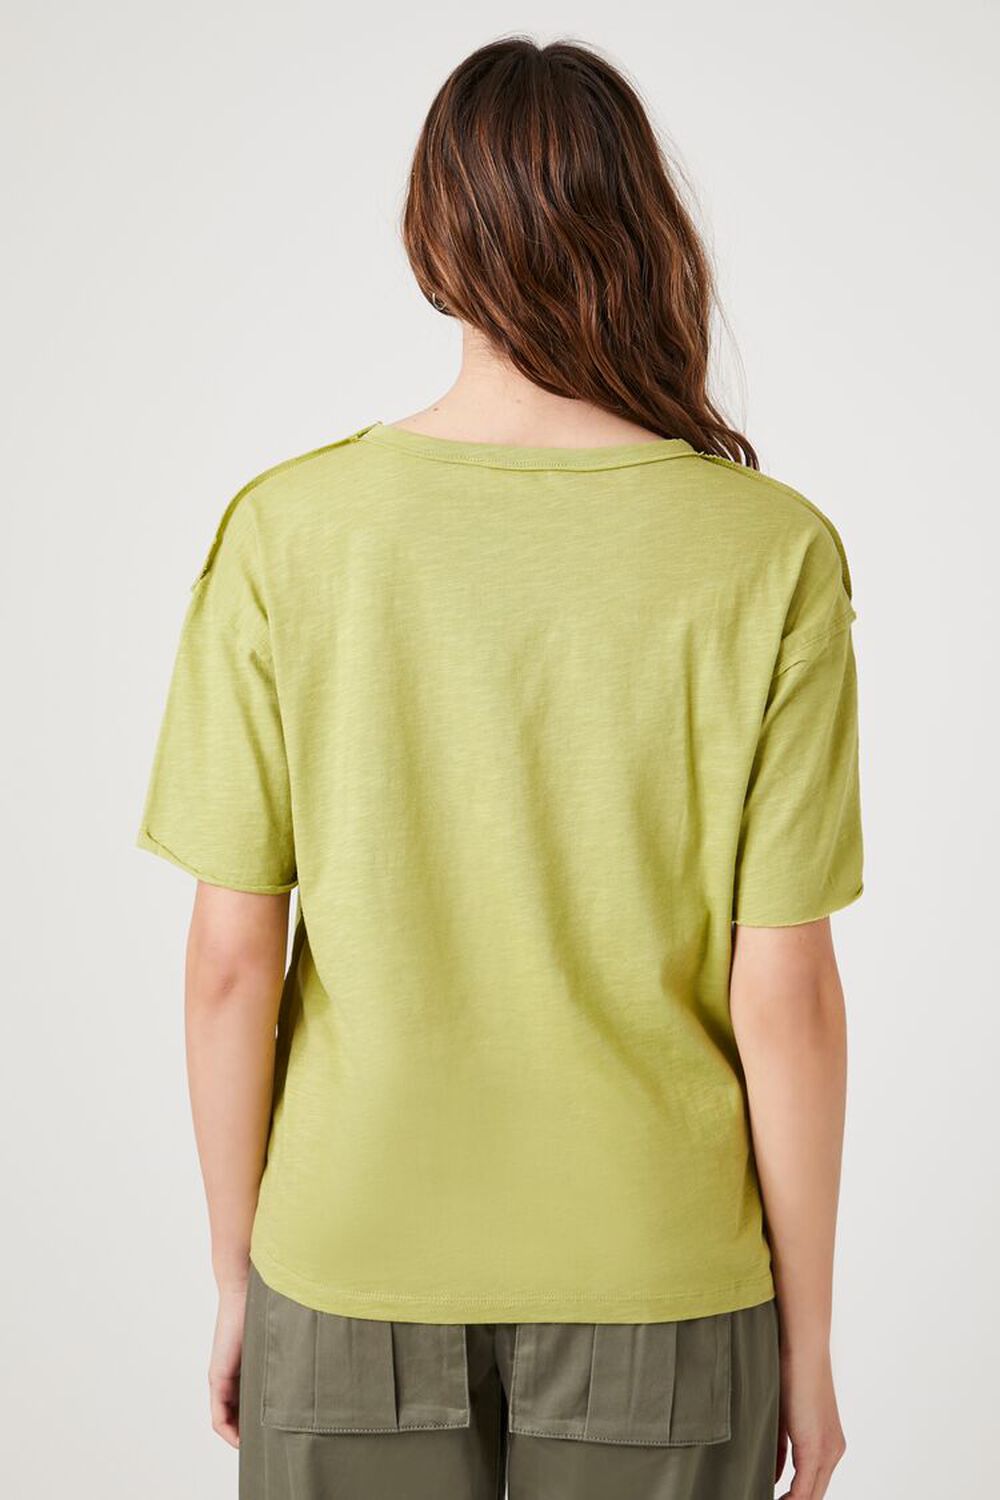 OLIVE Relaxed Raw-Cut Pocket Tee, image 3